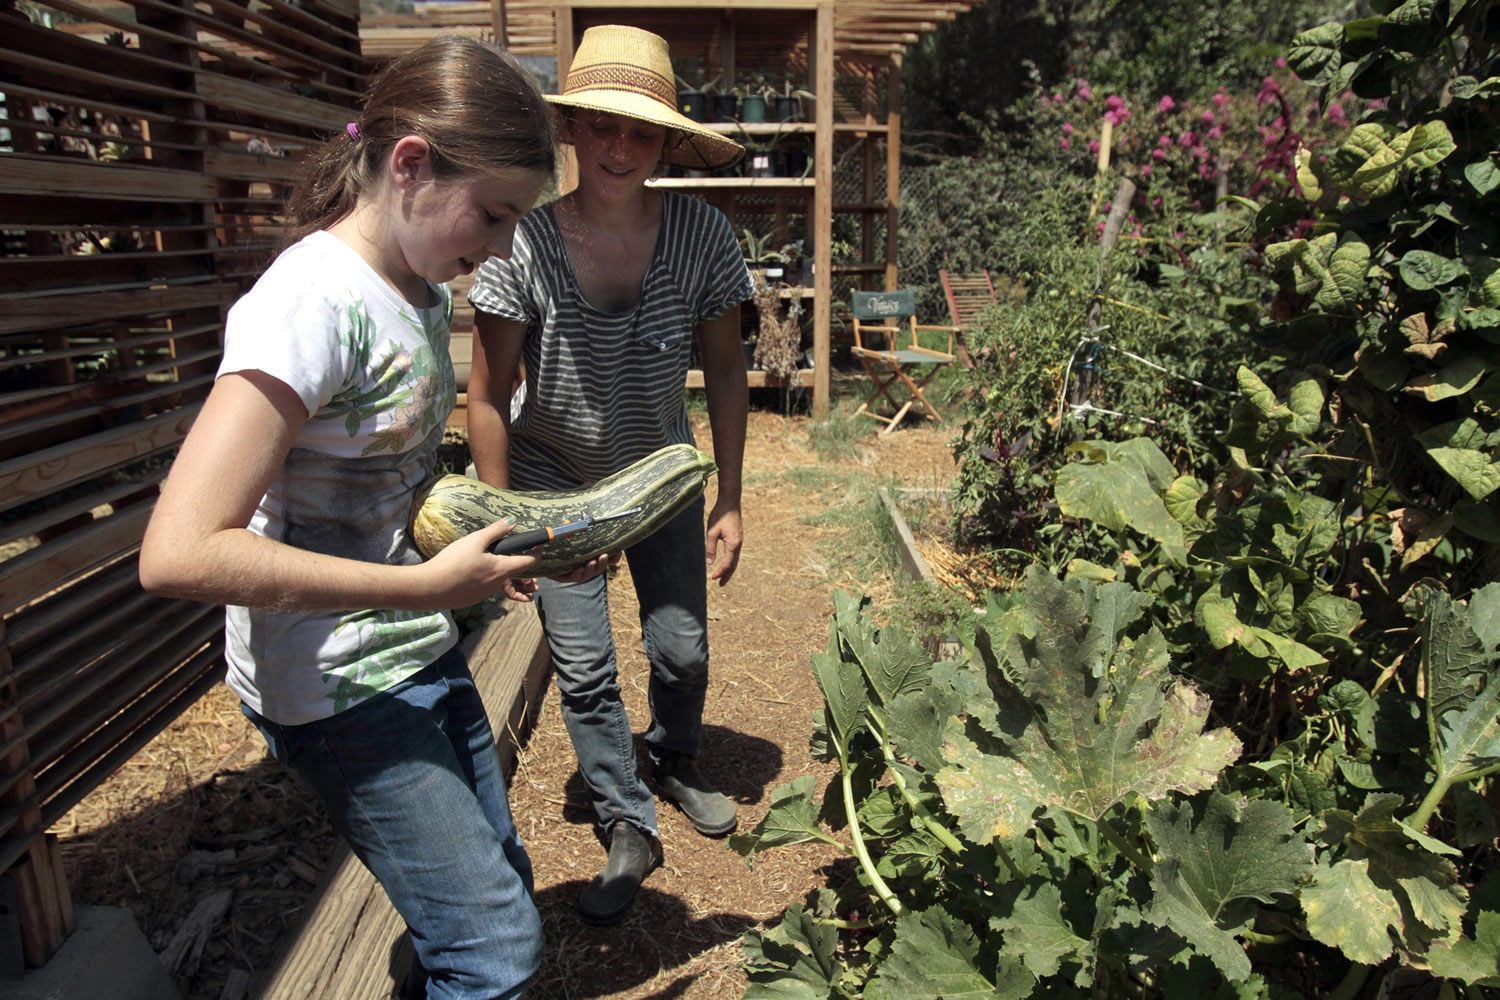 Macy, left, picks a large zucchini as teacher Faye Barry looks on at Taking the Reins in the Atwater Village neighborhood of Los Angeles.